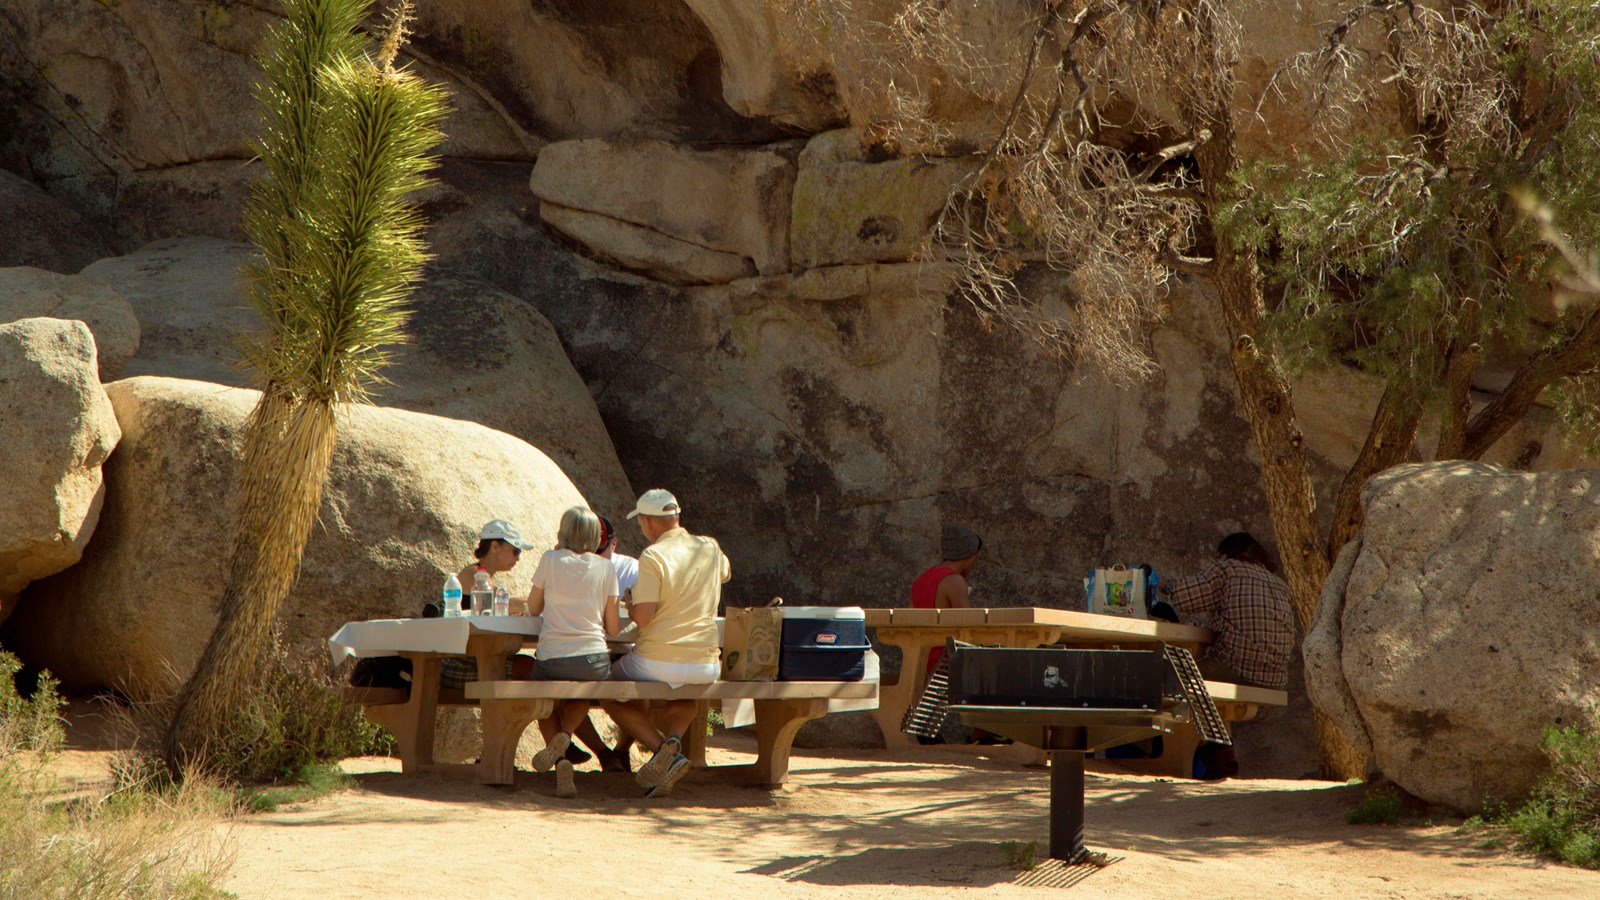 People sitting at a picnic table in front of a large rock.